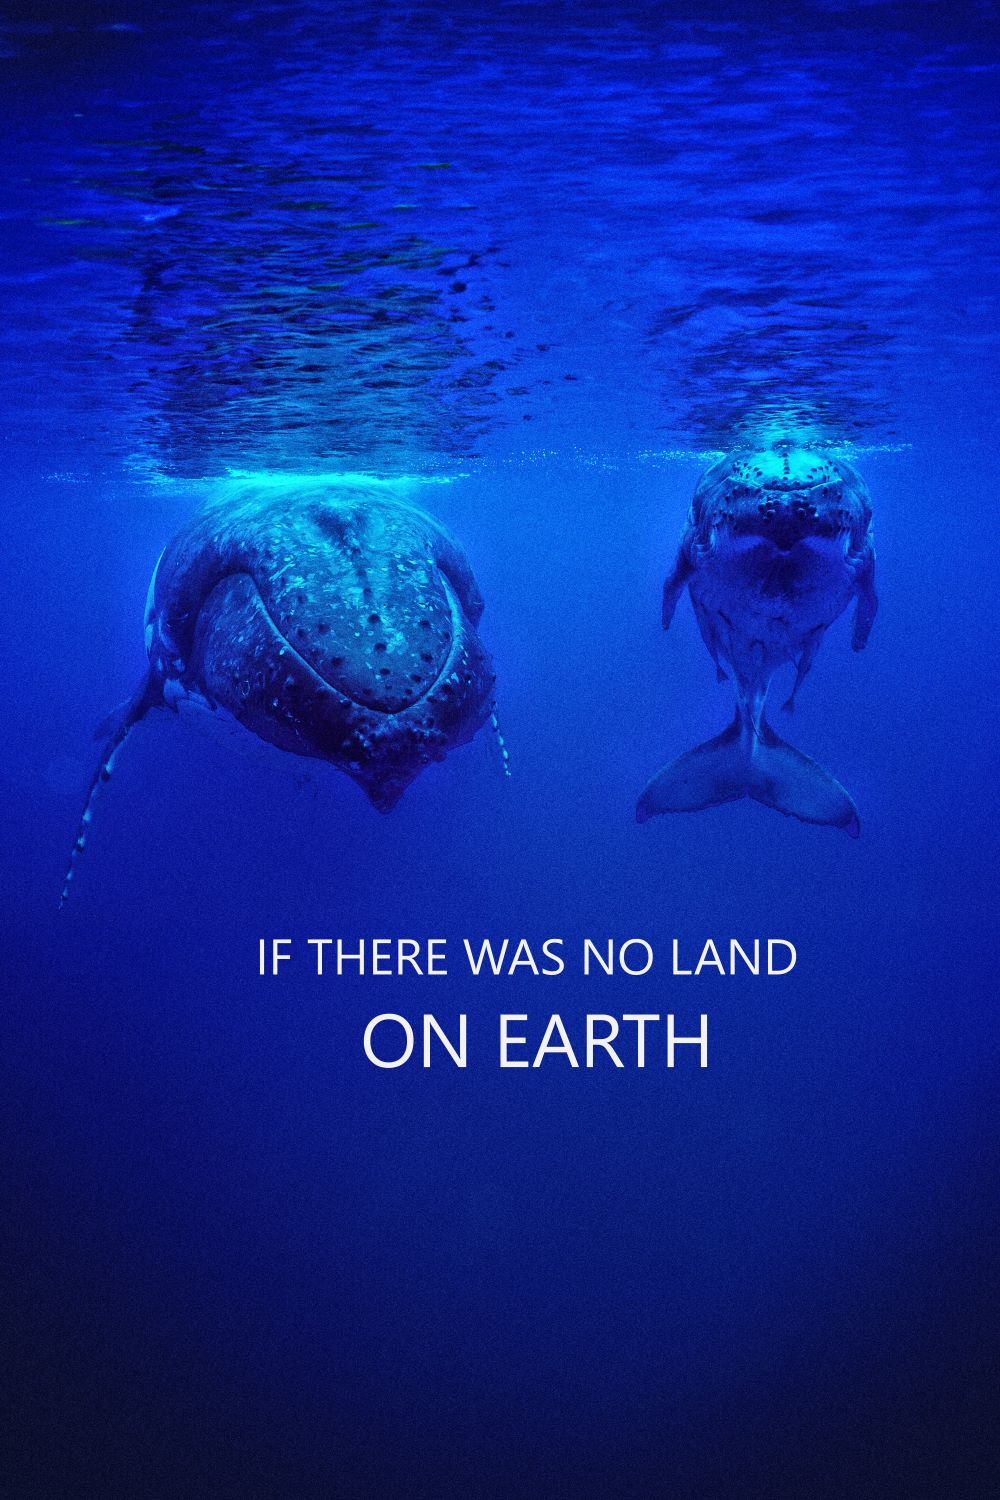 IF THERE WAS NO LAND ON EARTH